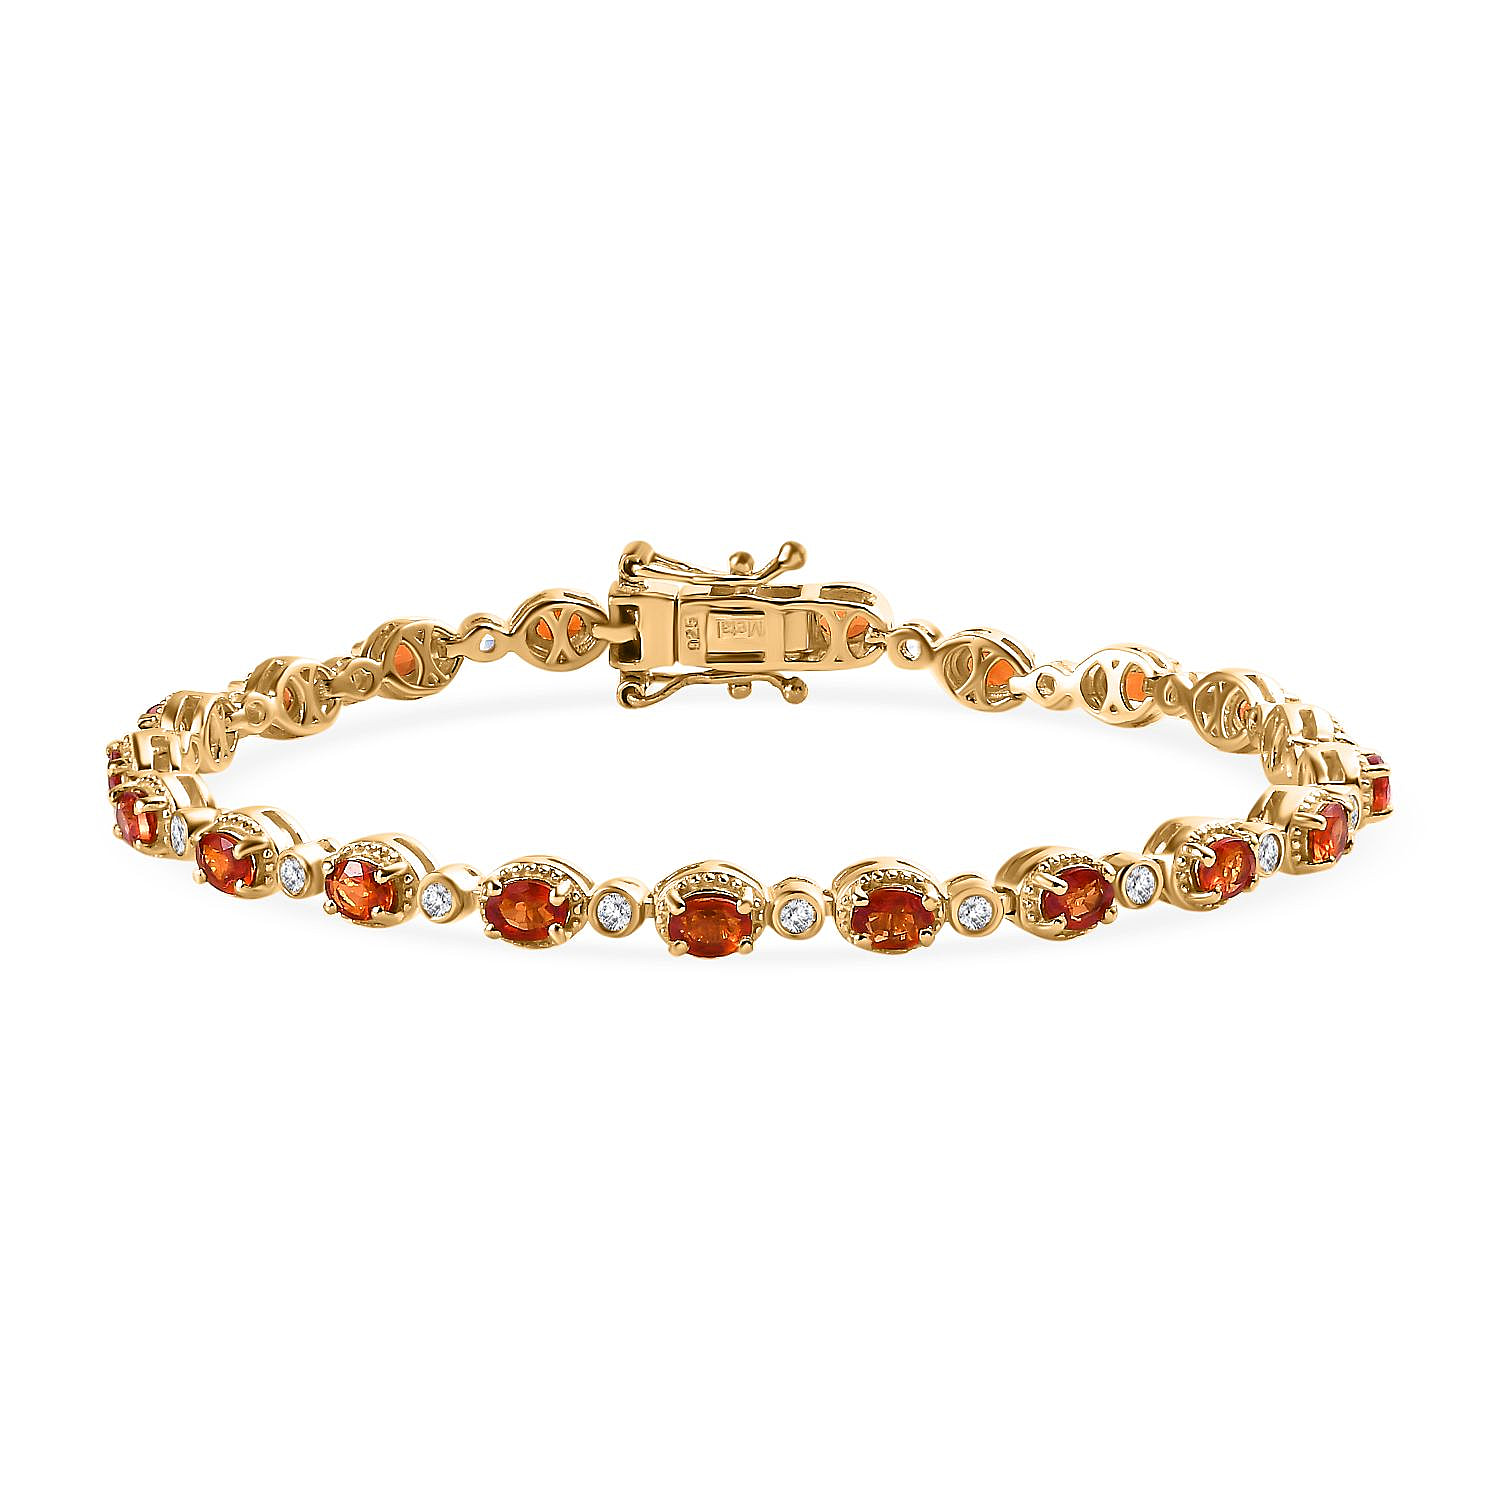 Red Sapphire, White Zircon Linking Bracelet (Size - 7) in 18K Vermeil YG Plated Sterling Silver 4.80 ct, Silver Wt. 9 Gms 6.020 Ct.